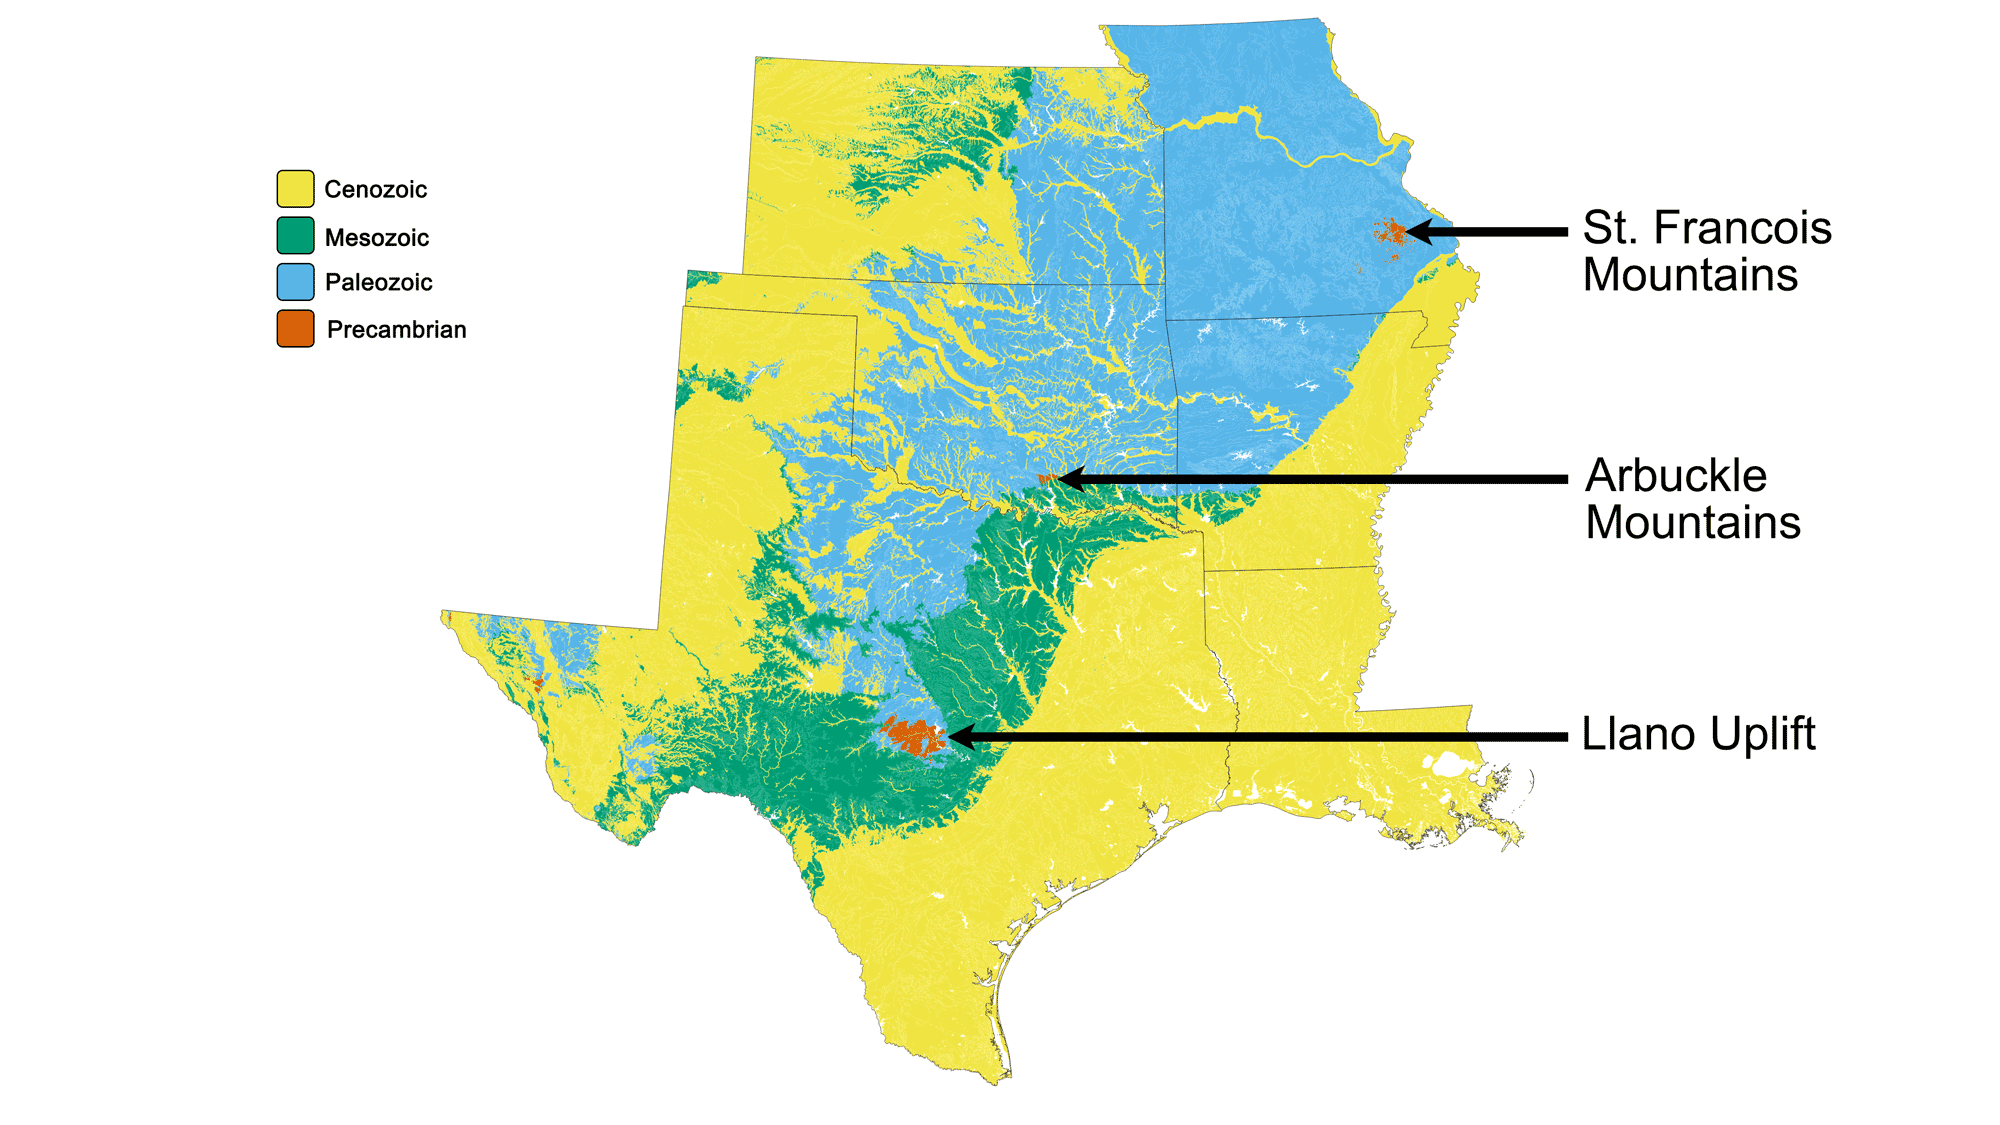 Geologic map of the south-central U.S. with Precambrian, Paleozoic, Mesozoic, and Cenozoic rocks color-coded. Precambrian rocks of the St. Francois Mountains in Missouri, Arbuckle Mountains in Oklahoma, and the Llano Uplift in Texas are labeled.